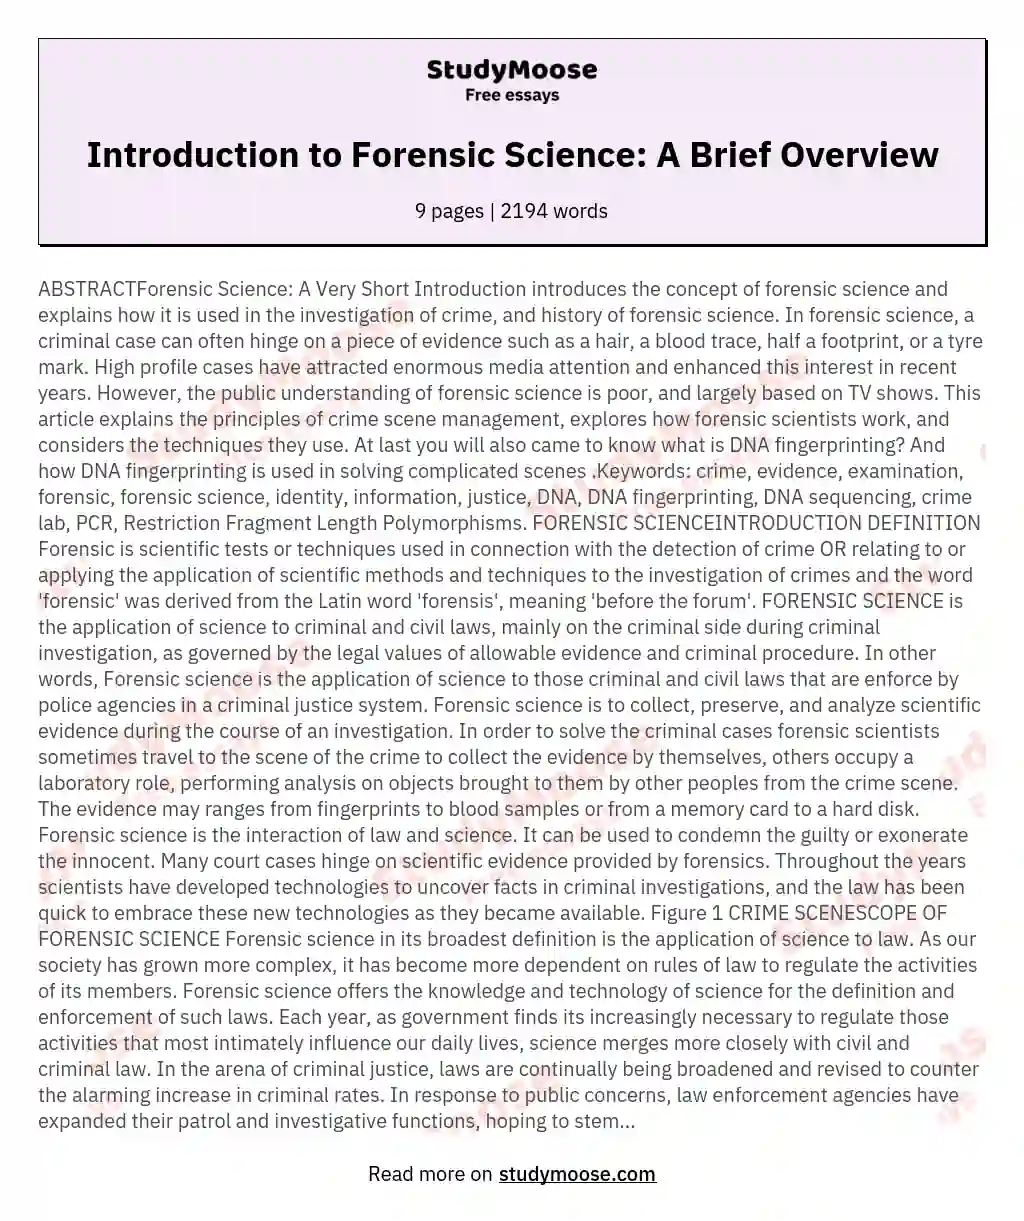 Introduction to Forensic Science: A Brief Overview essay